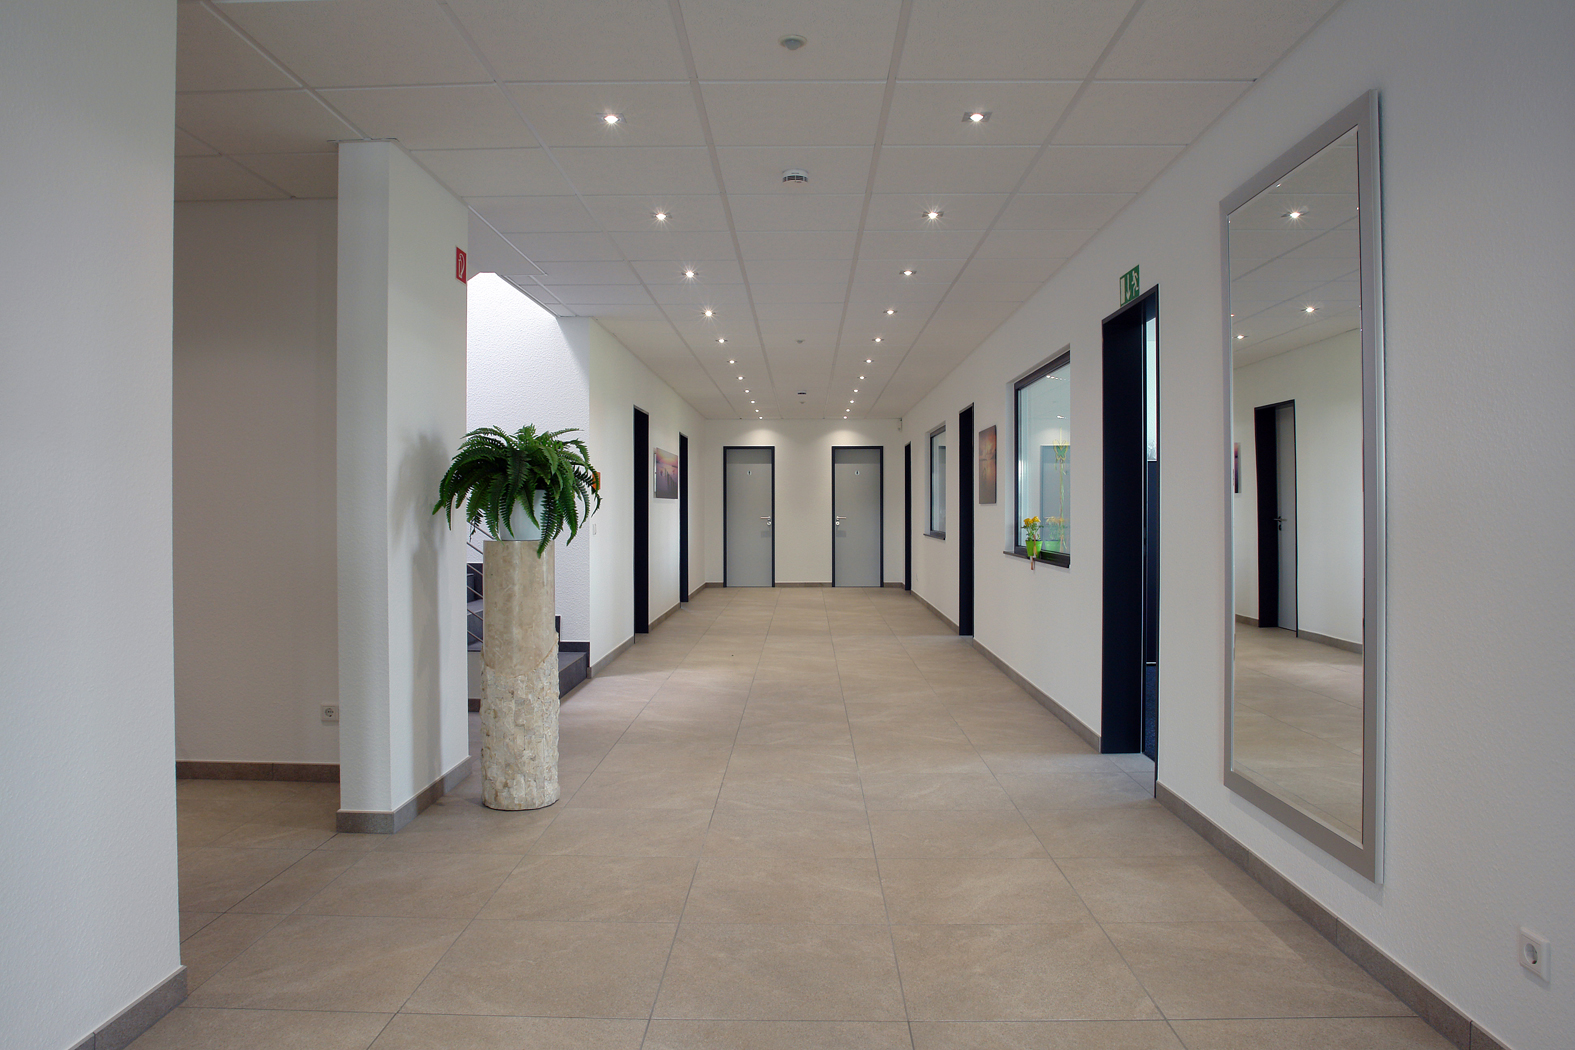 Offices of the company building | Pludra International